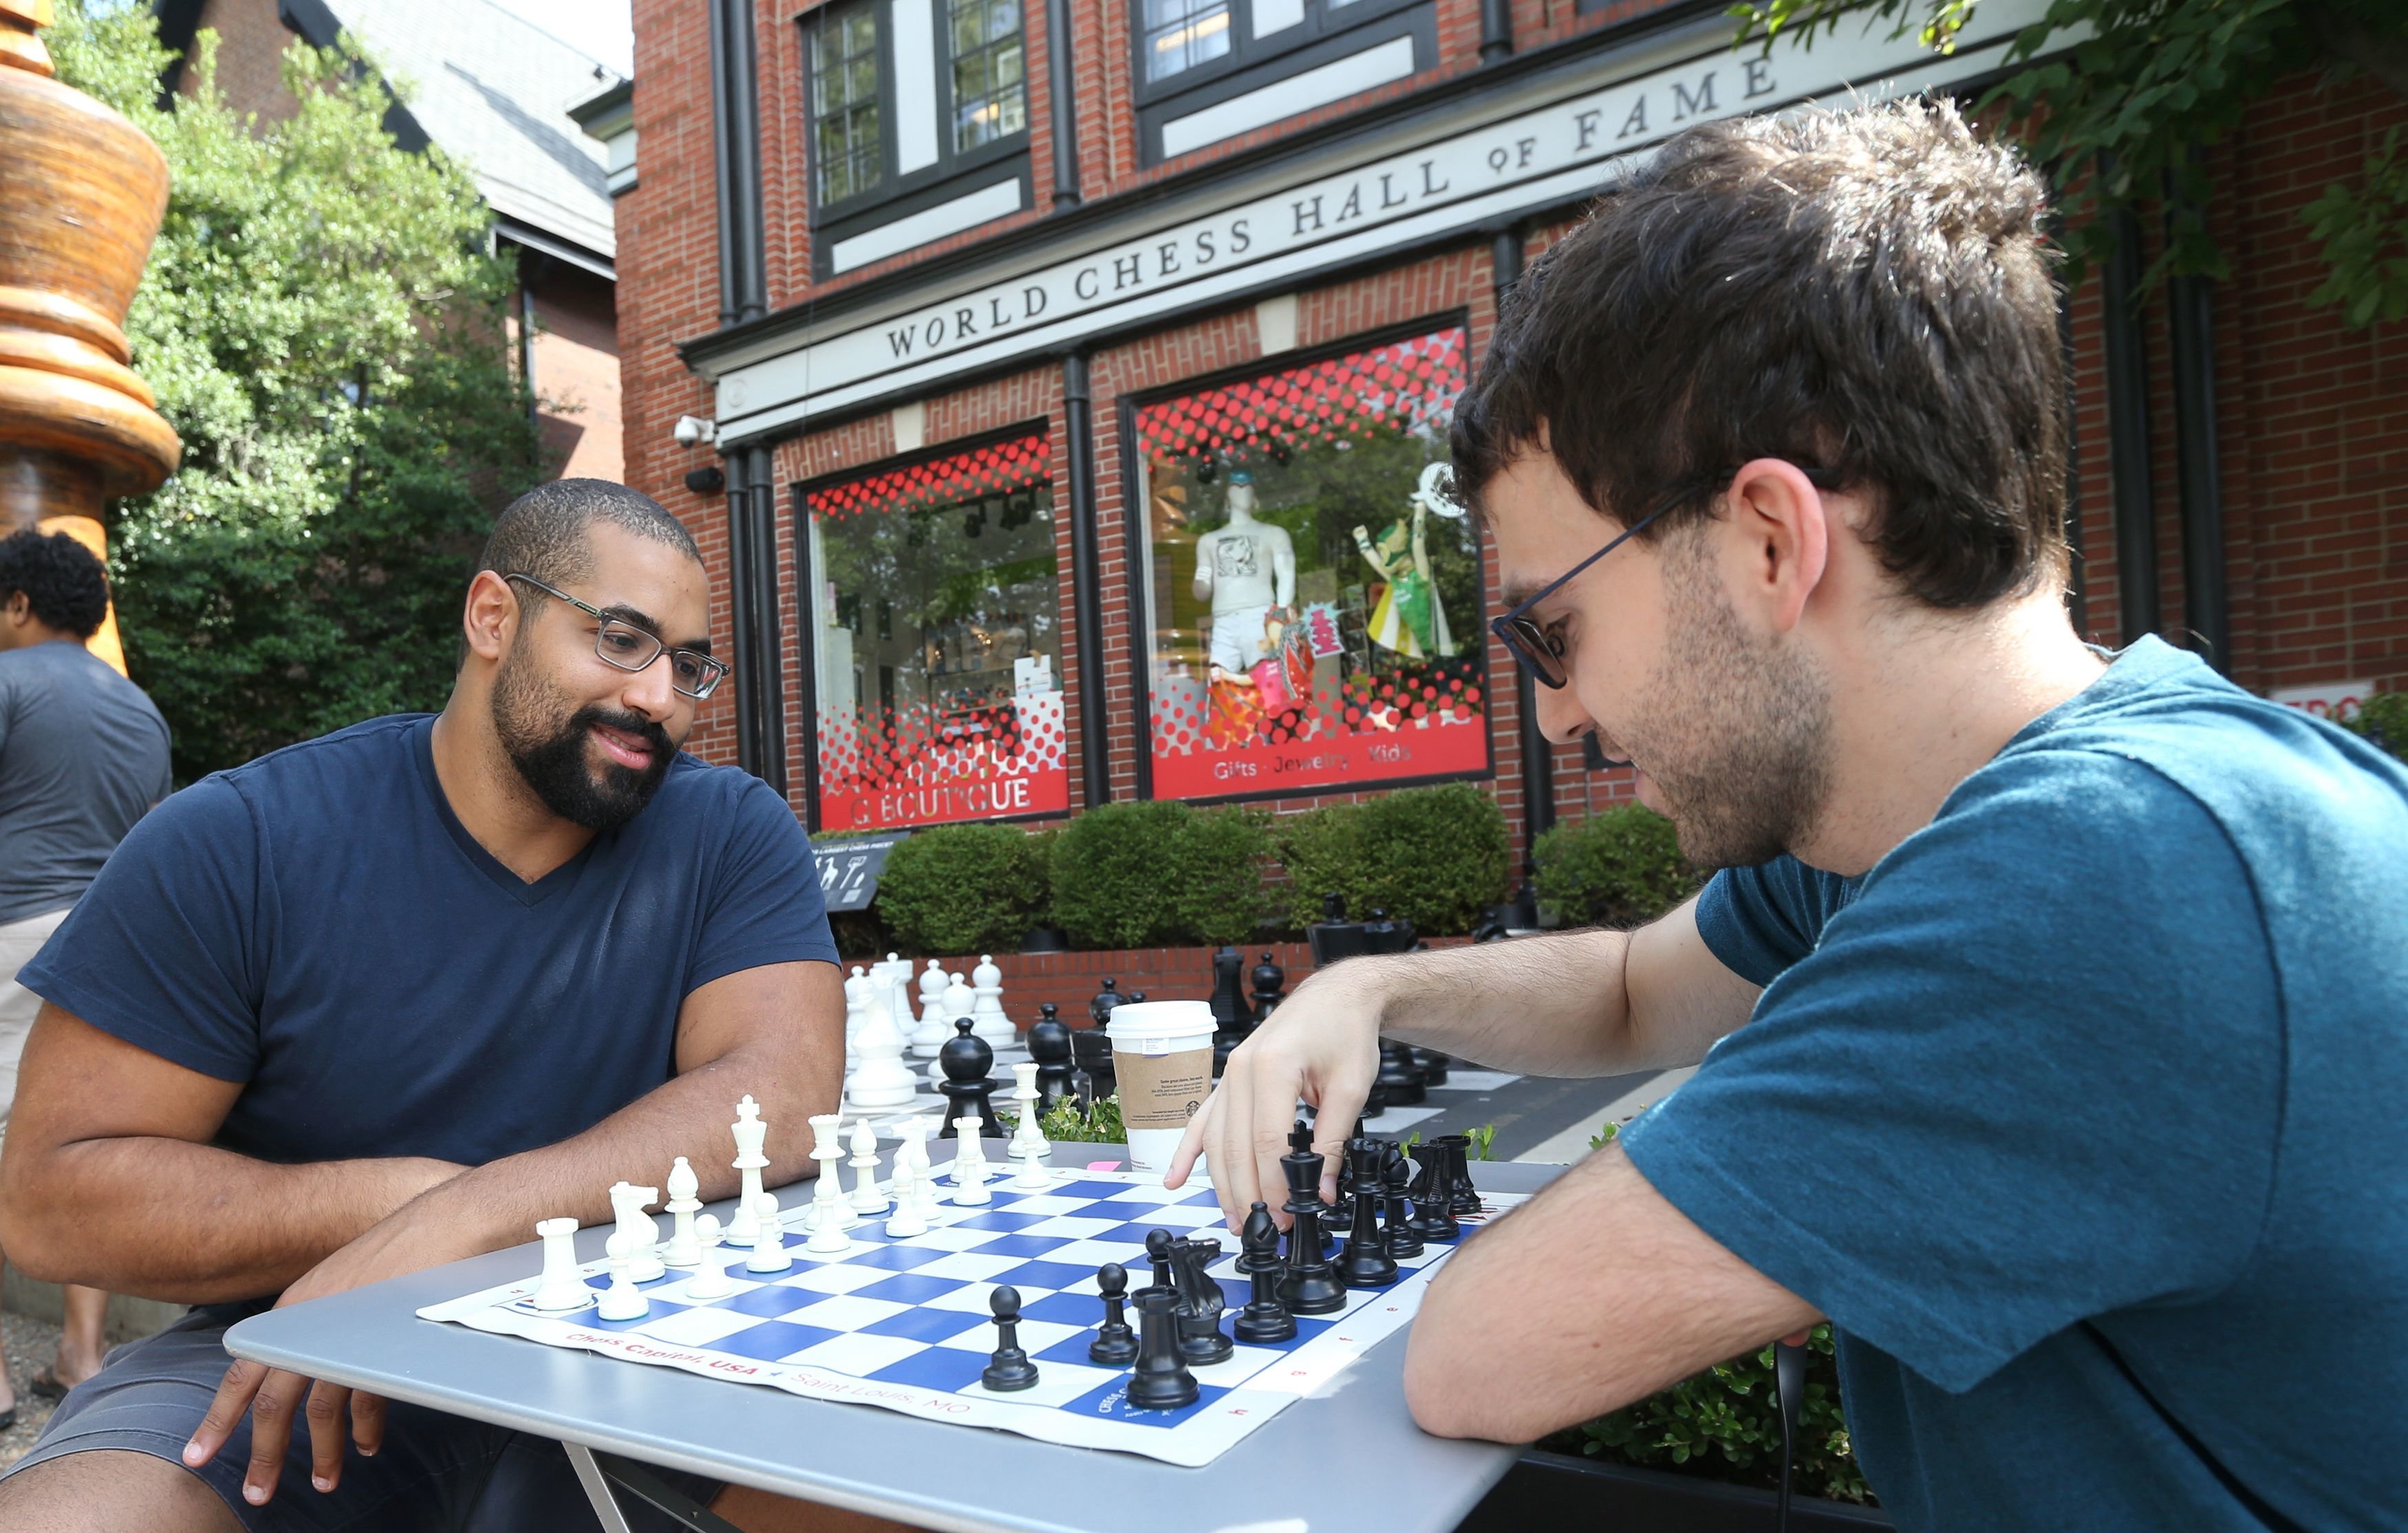 This Ex-NFL Player Is On A Mission To Become A Chess Master